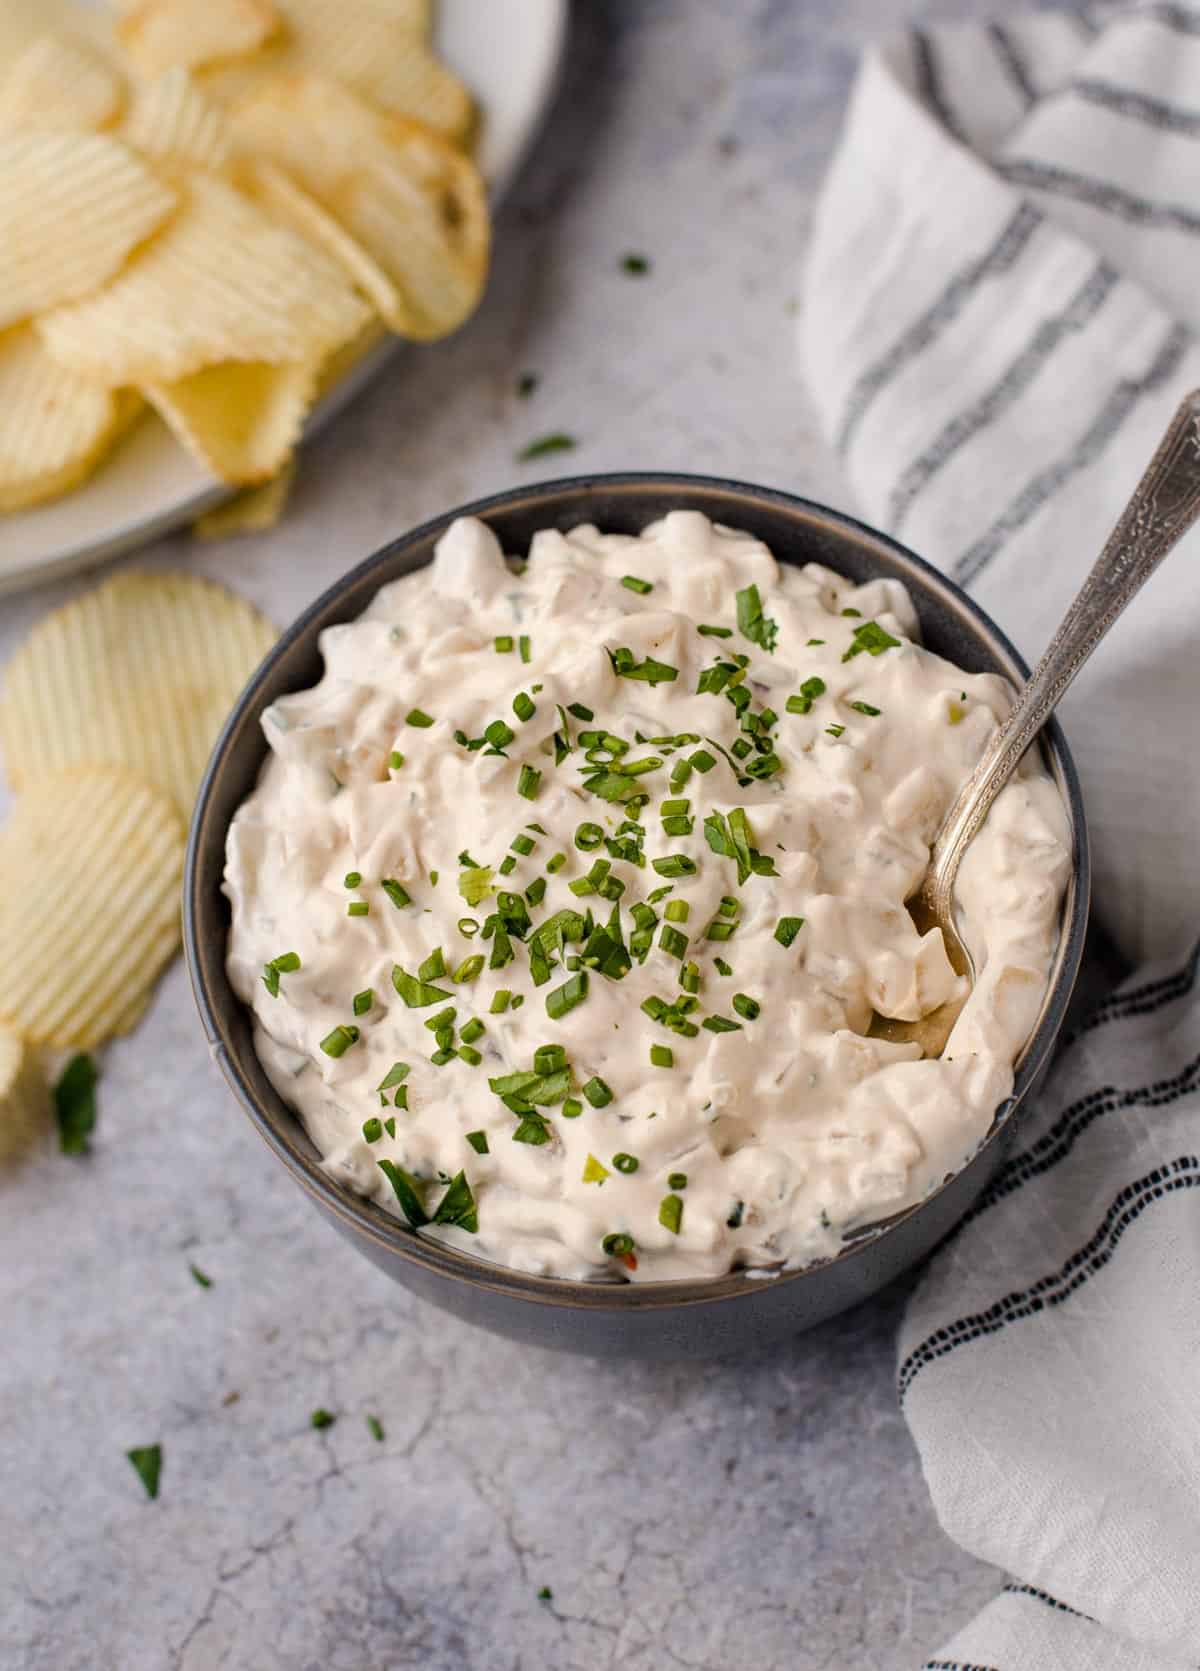 Smoked onion dip with sour cream and chives.